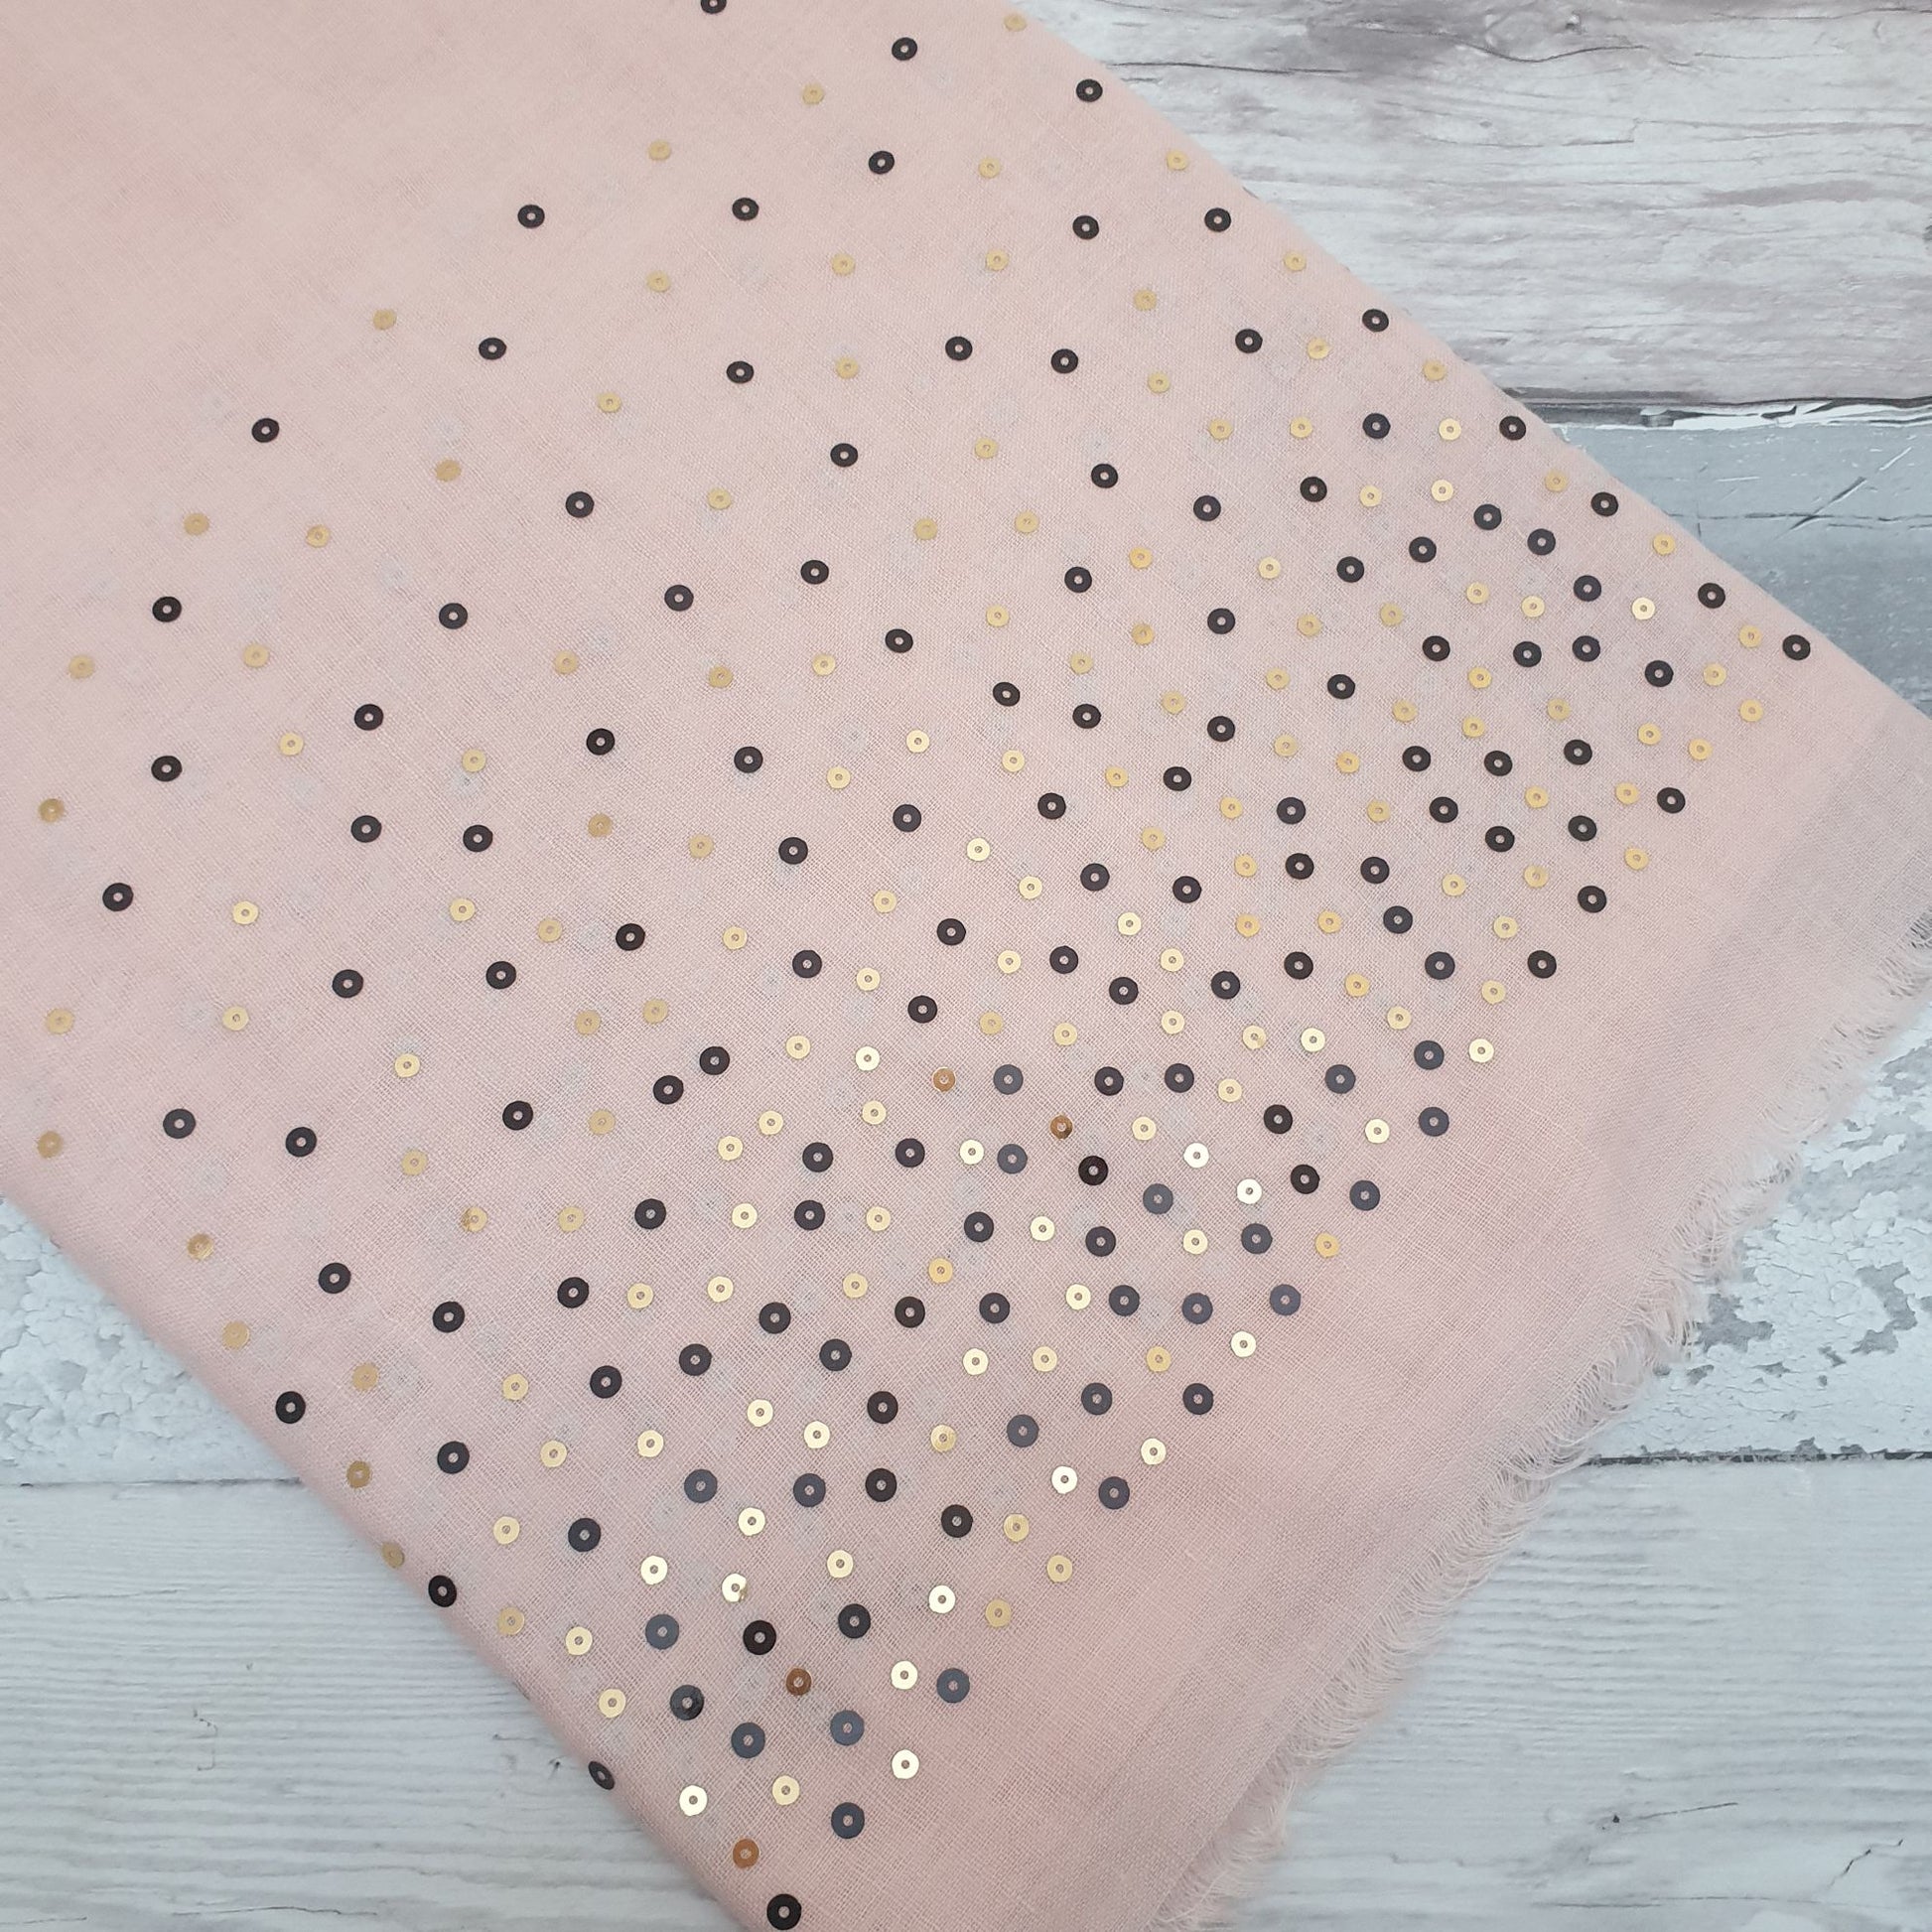 Pale Pink scarf decorated with sequins of gold, silver, black and bronze.